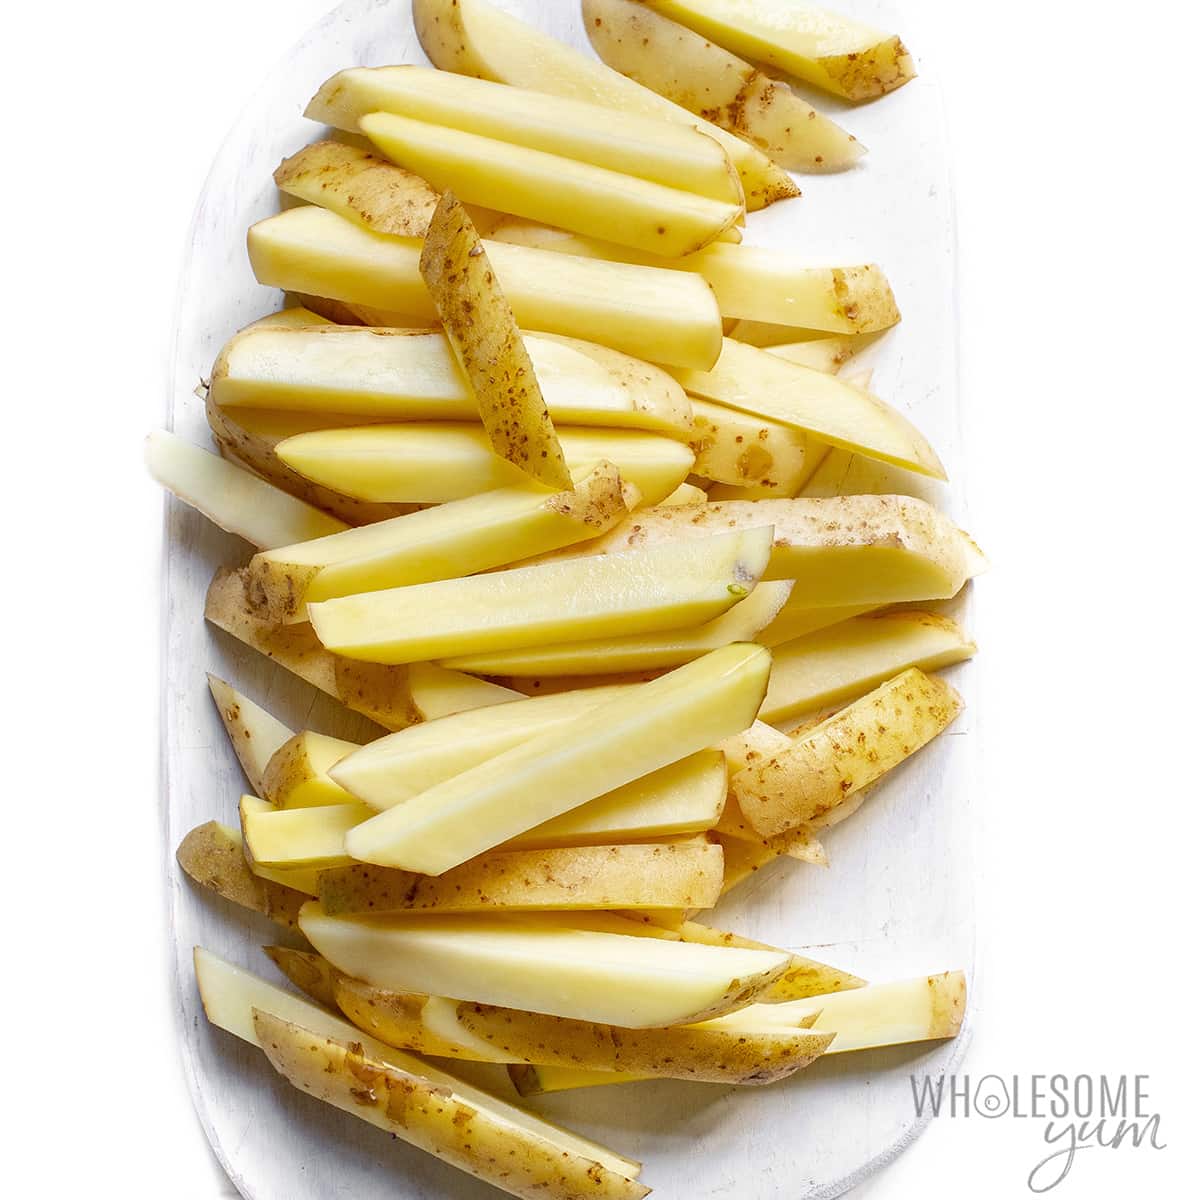 Potatoes sliced into strips on a plate.